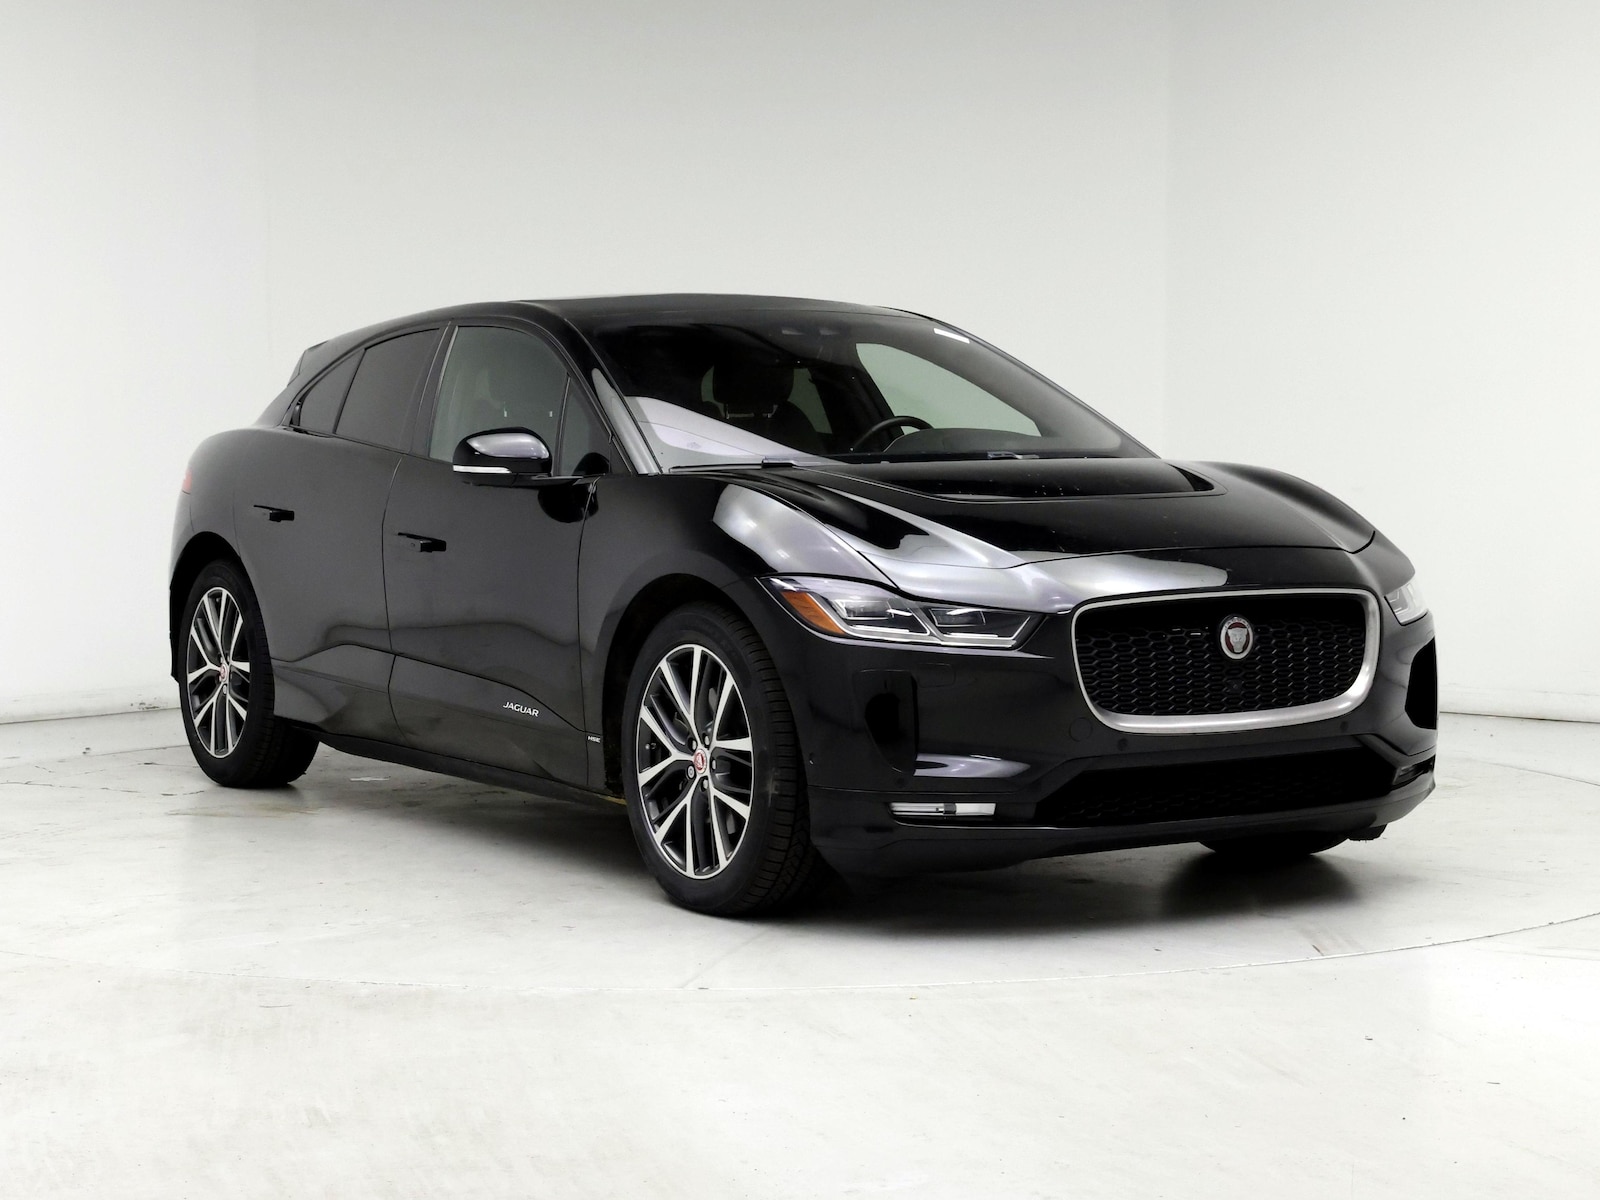 Used 2019 Jaguar I-PACE First Edition with VIN SADHD2S17K1F76729 for sale in Kenosha, WI